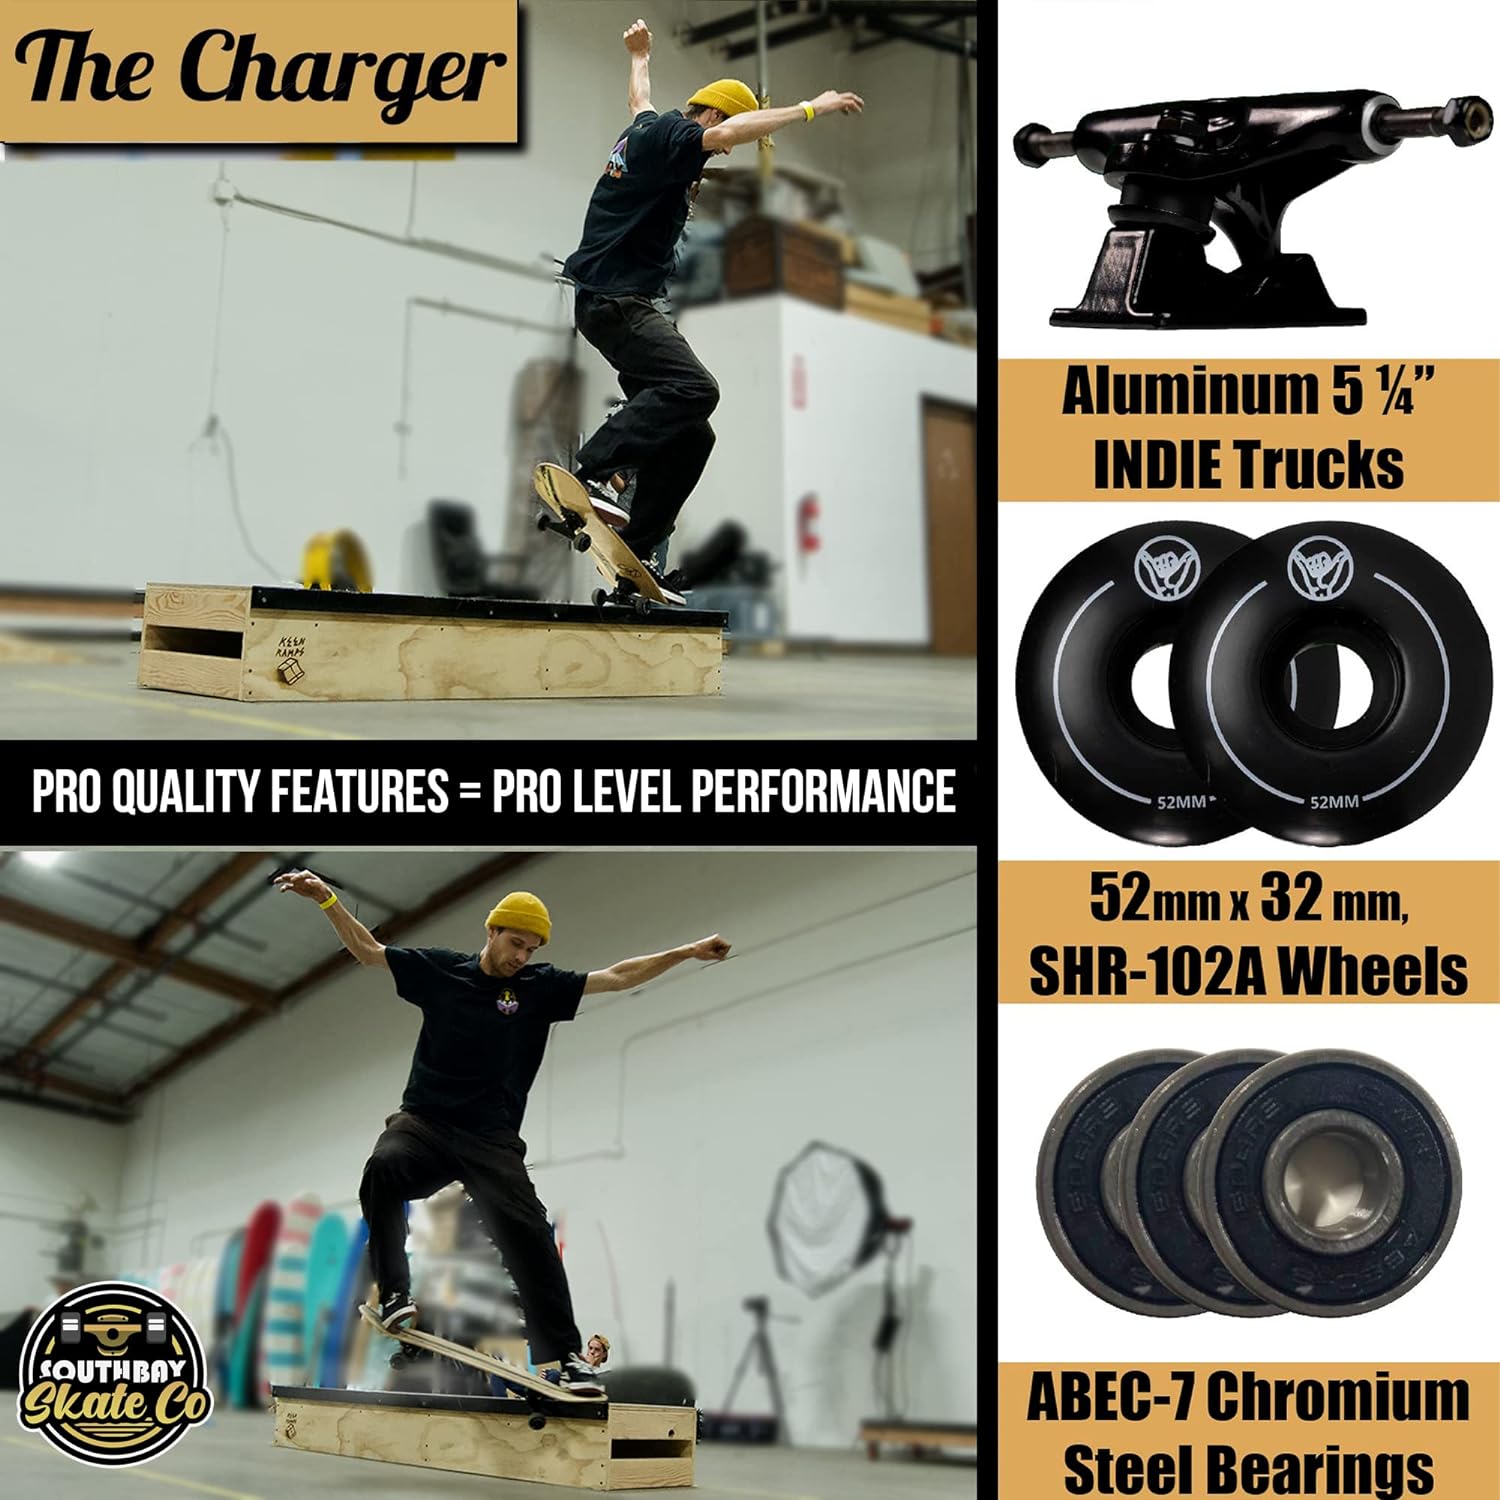 South Bay Skate Co™ - Premium Skateboards for Beginners - 31.75” x 8.25” Charger Skateboard - Performance Trick Skate Board Shape for Adults, Teens  Kids - 100% Pre-Assembled - Clear Grip Tape Deck